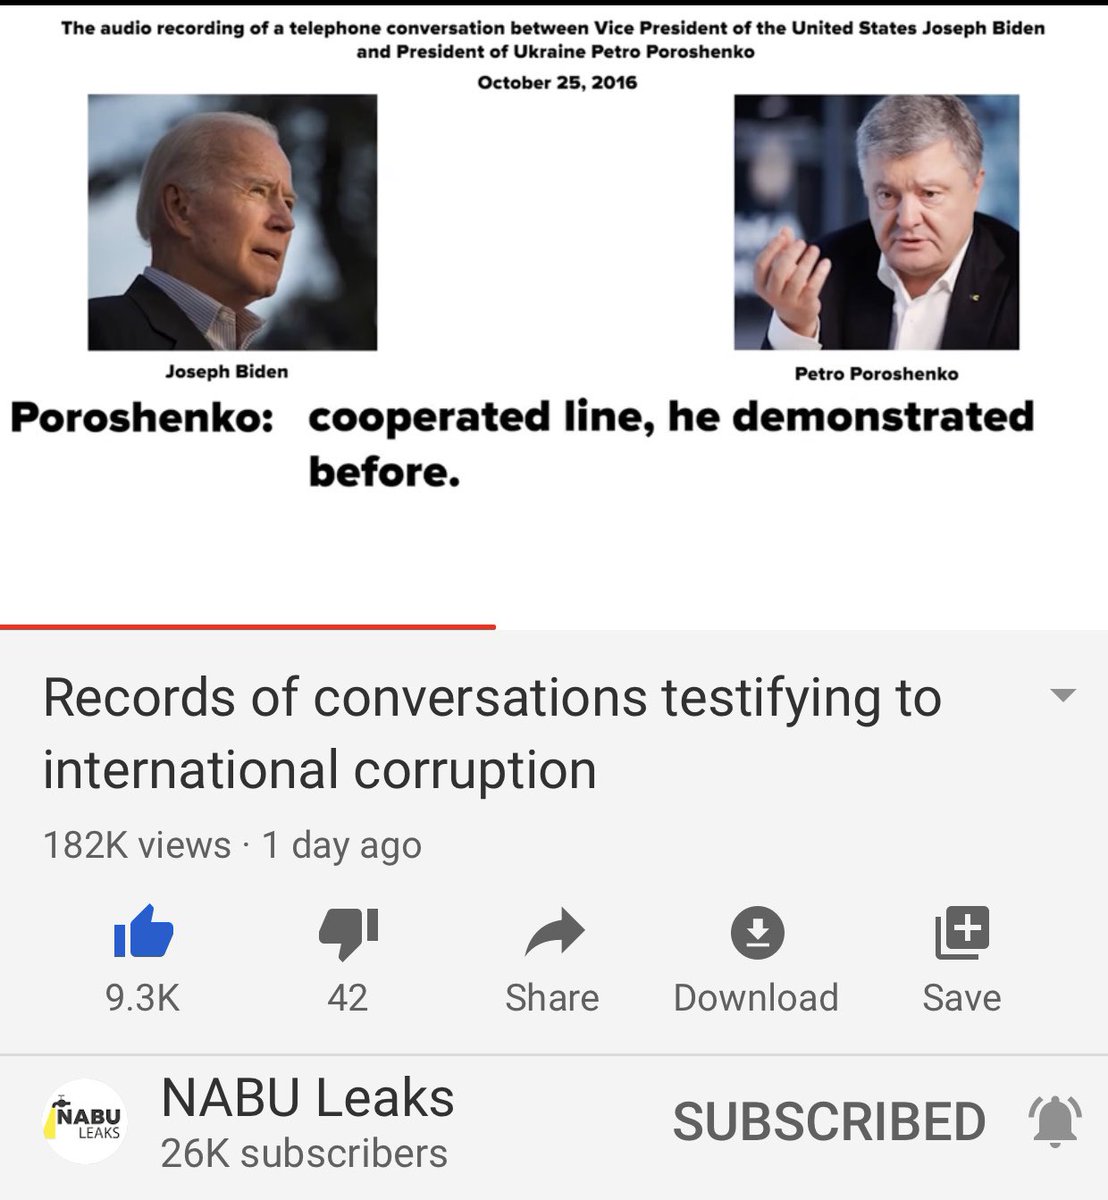 So Poroshenko tells Biden that things weren’t going well with Privat Bank aka the Bank OBiden but he has a new insider that he trusts will protect them